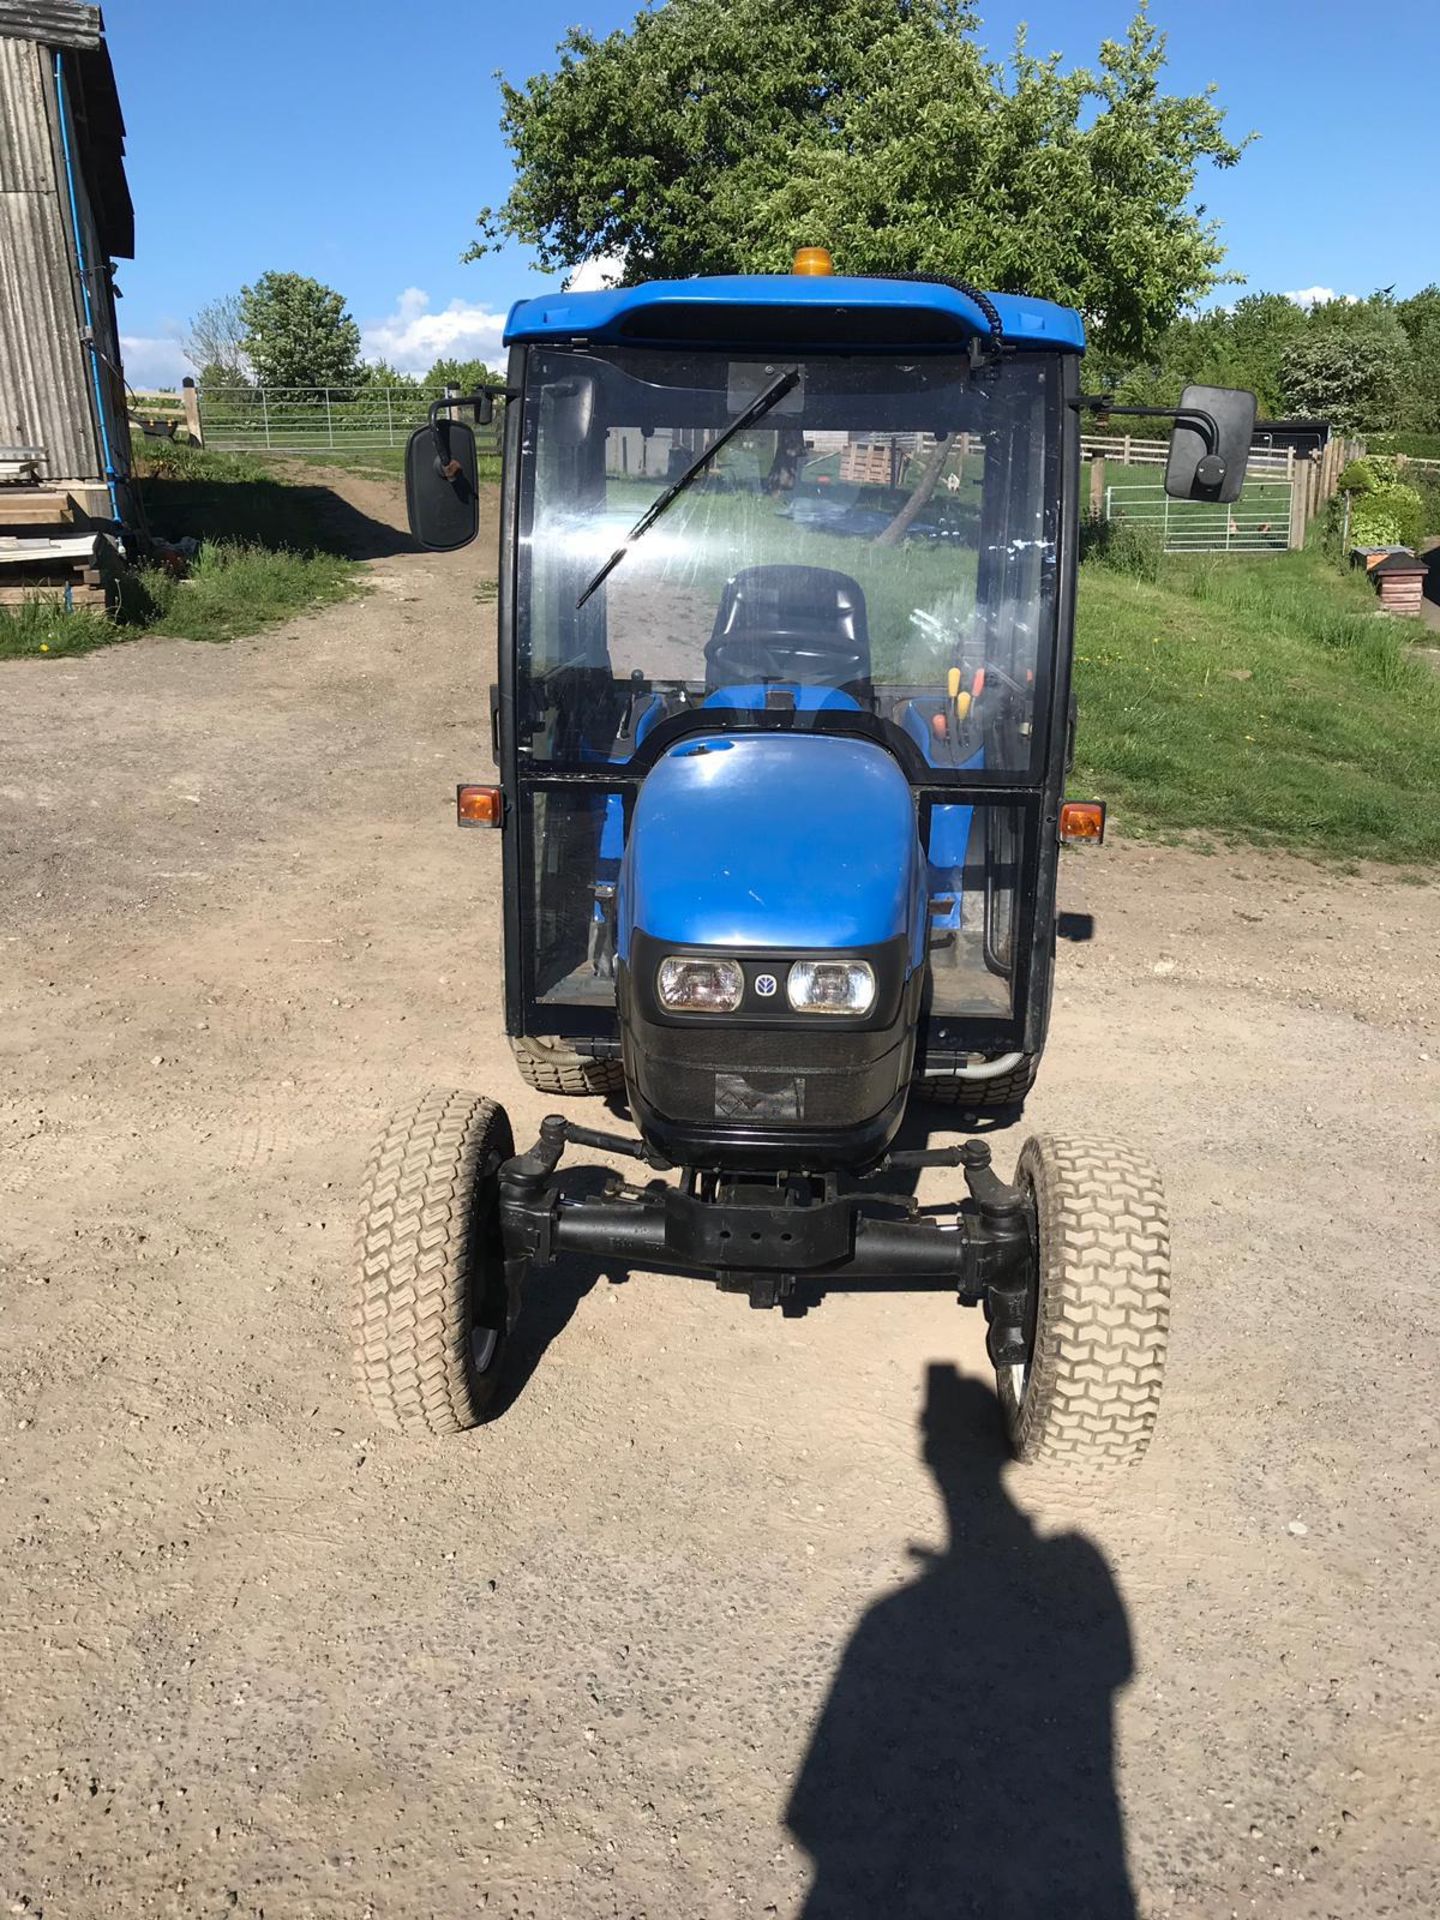 2004 NEW HOLLAND TRACTOR C27D - Image 4 of 11